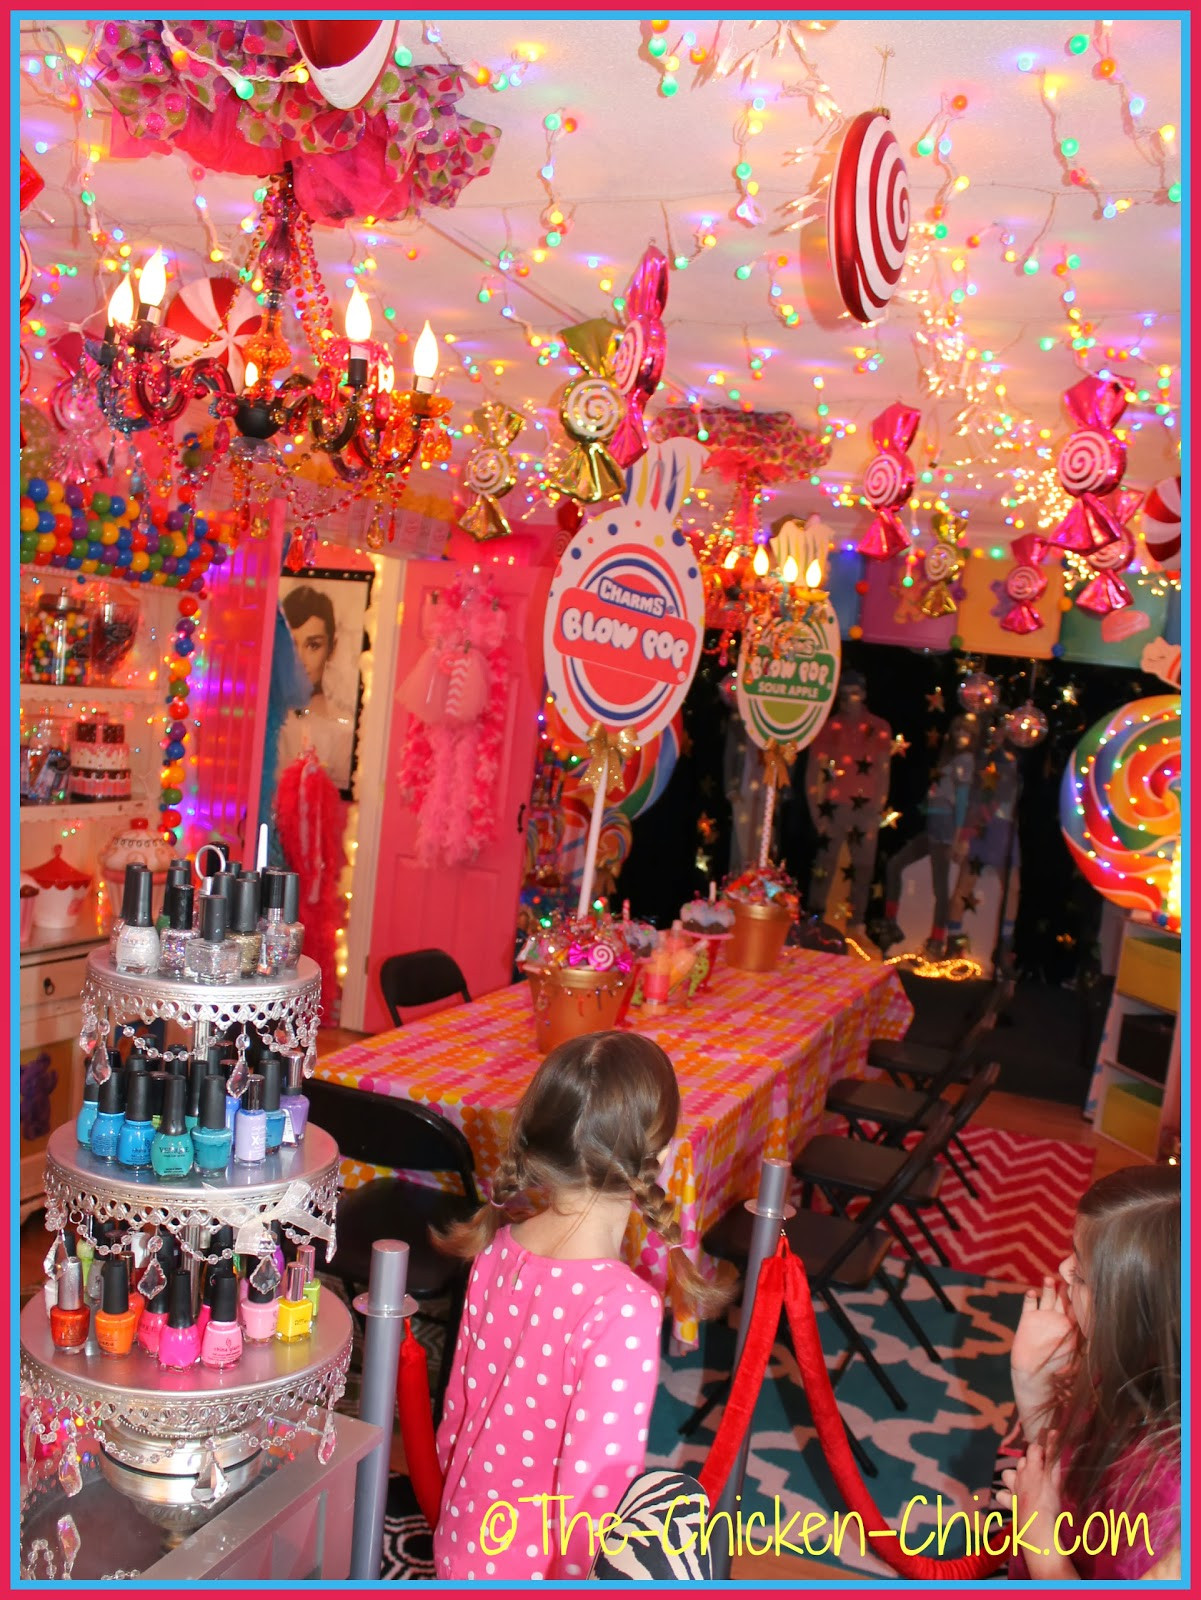 7 Year Old Birthday Party Ideas
 Spa Birthday Party Ideas For 7 Year Olds